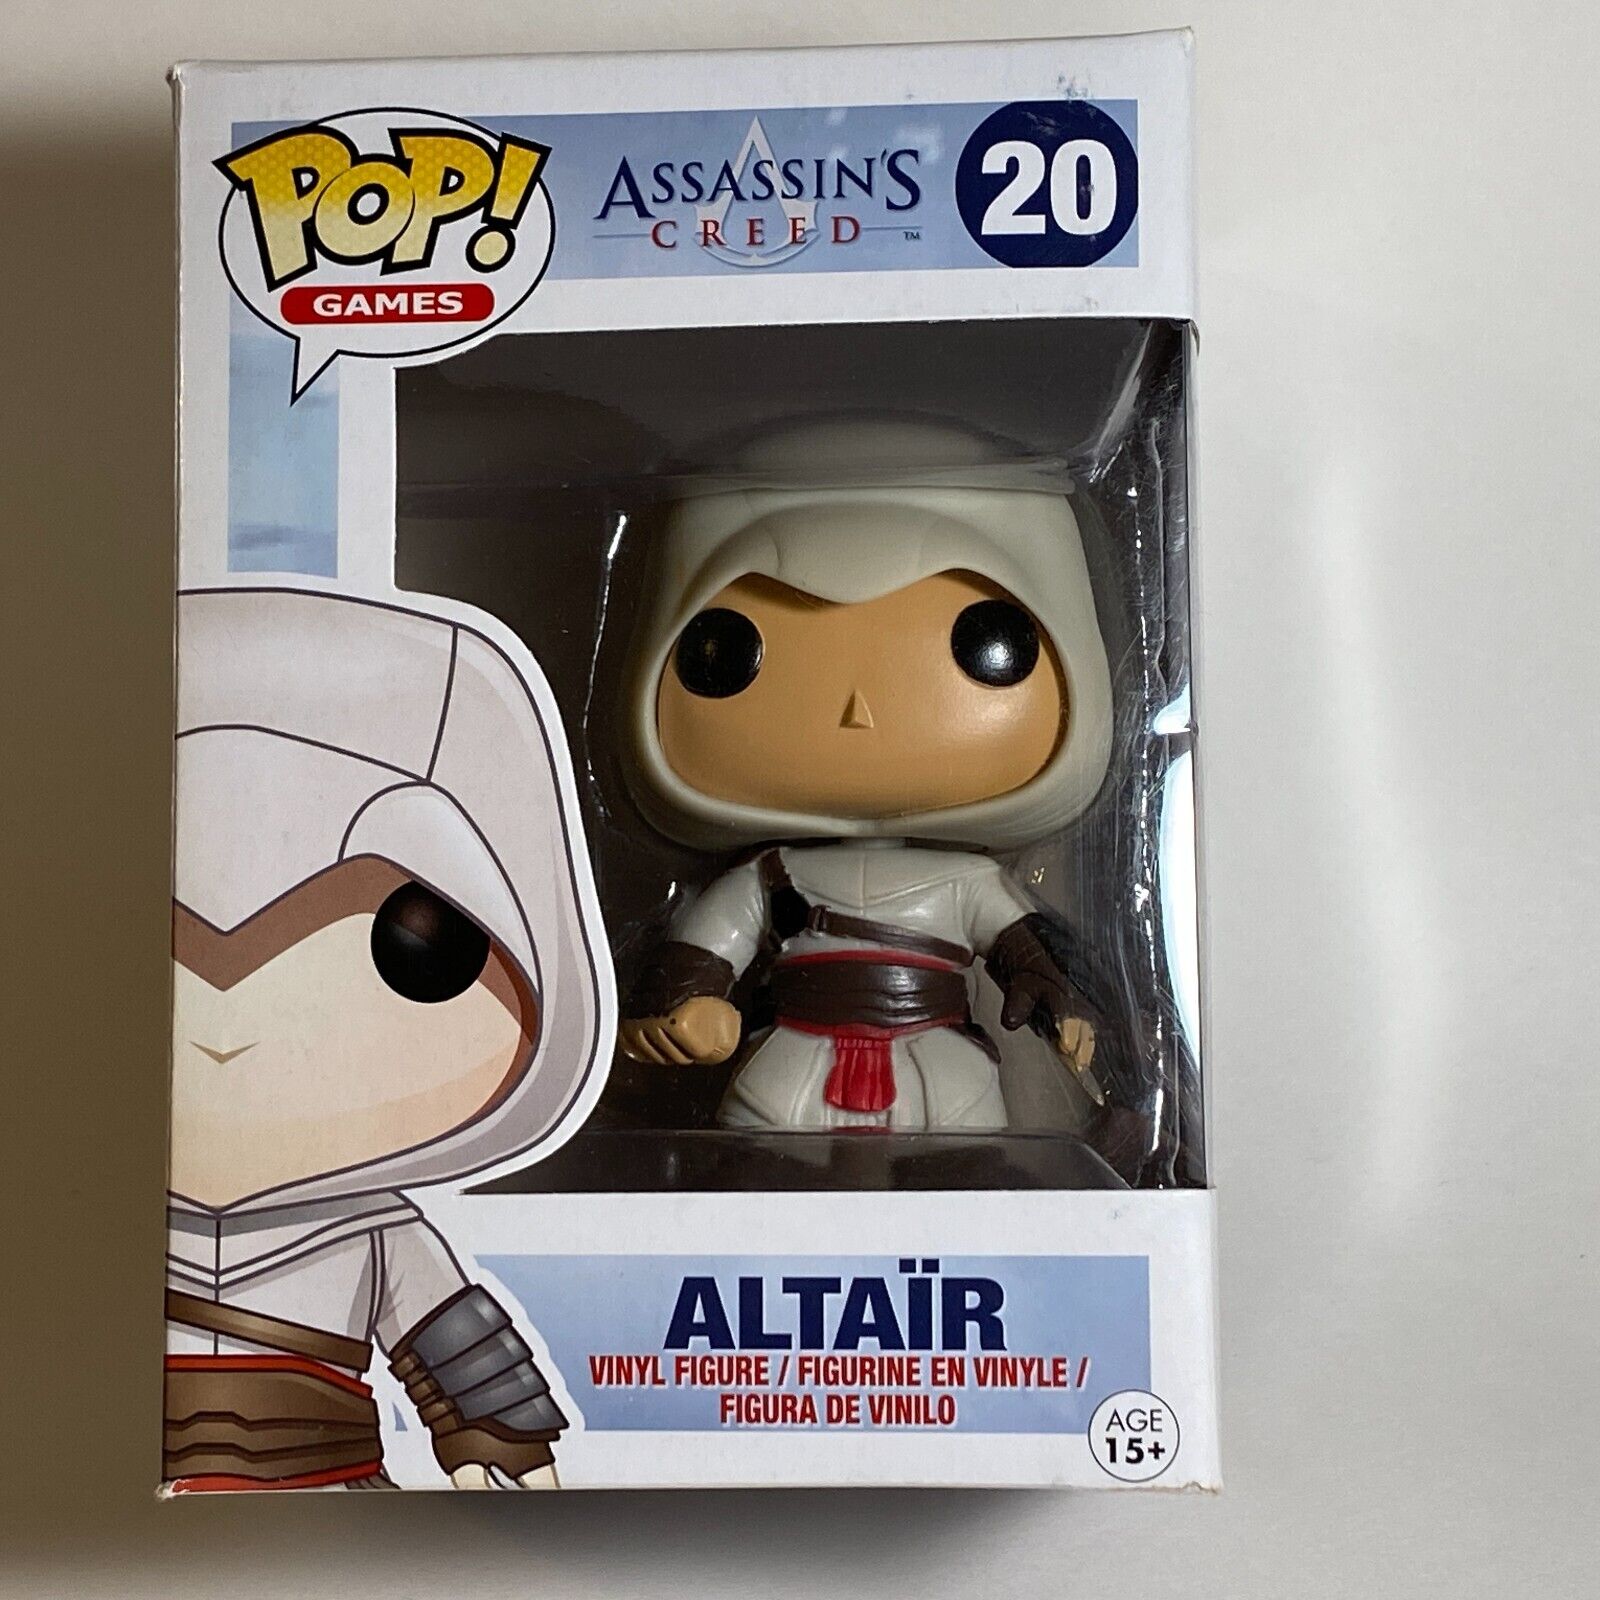 Assassin’s Creed ALTAIR Funko Pop #20 VAULTED (2013) NEW